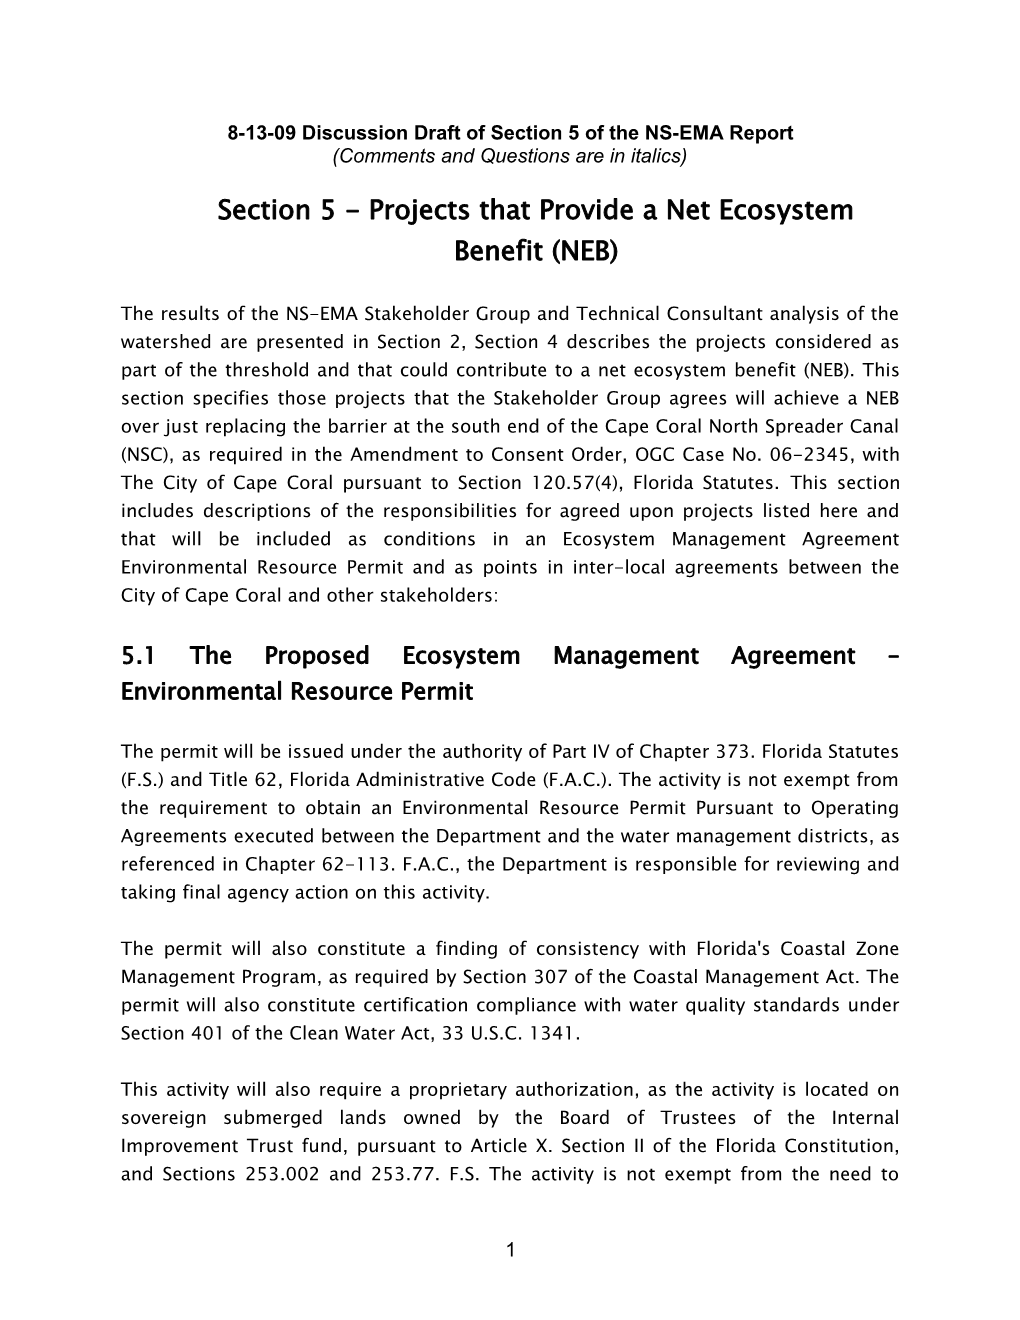 North Spreader Canal Ecosystem Management Agreement Process